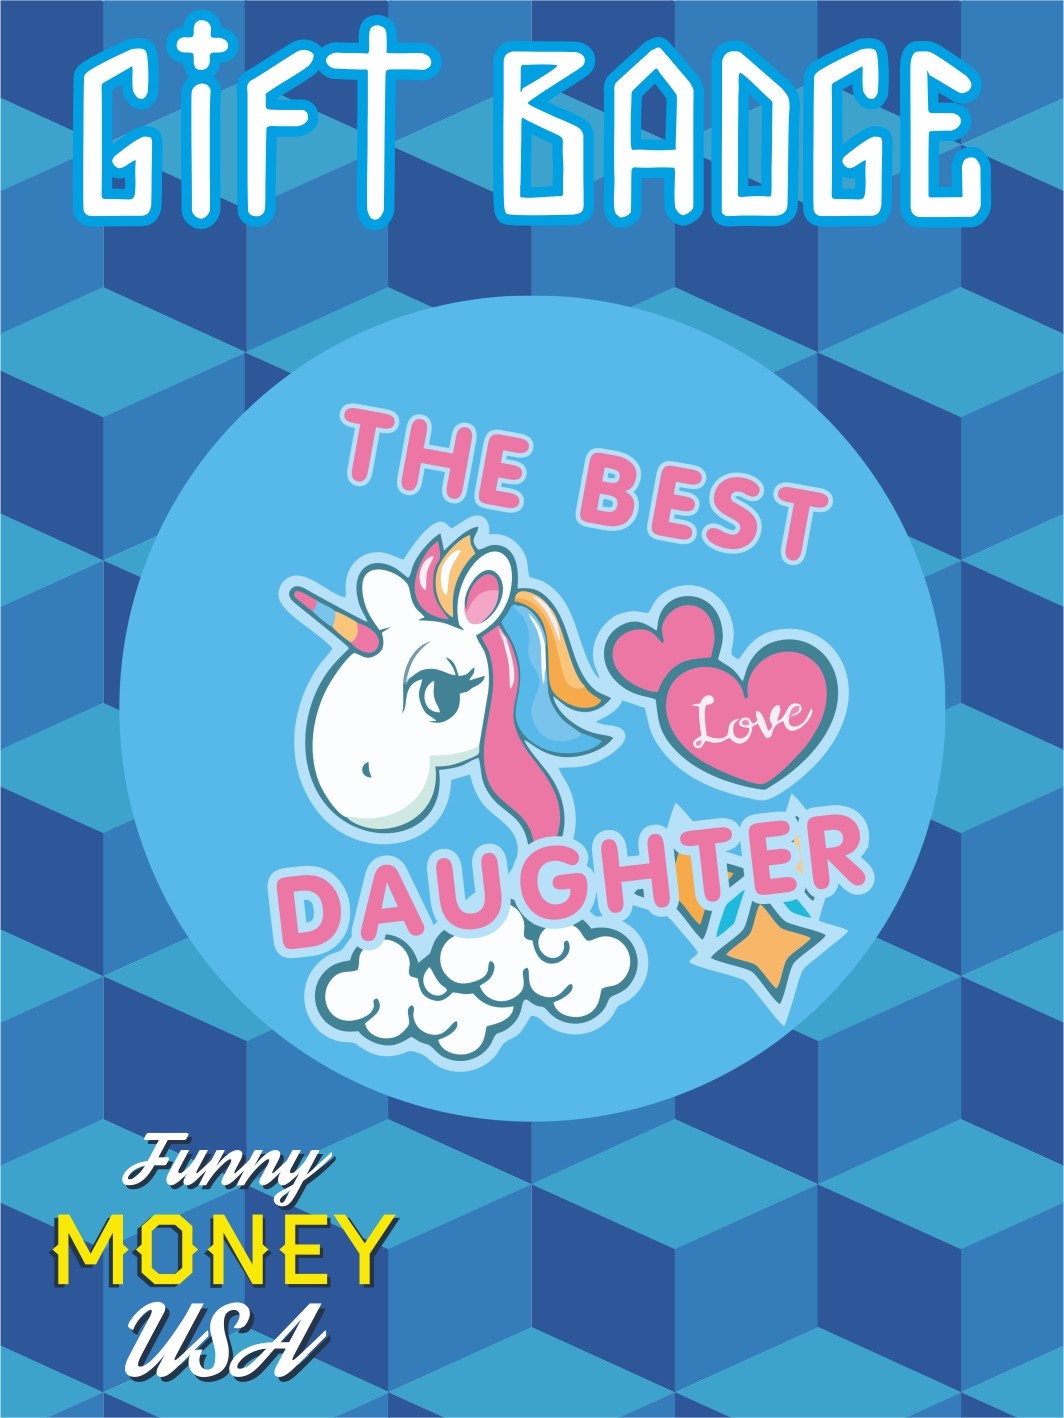 Gift badges "Best Daugther"